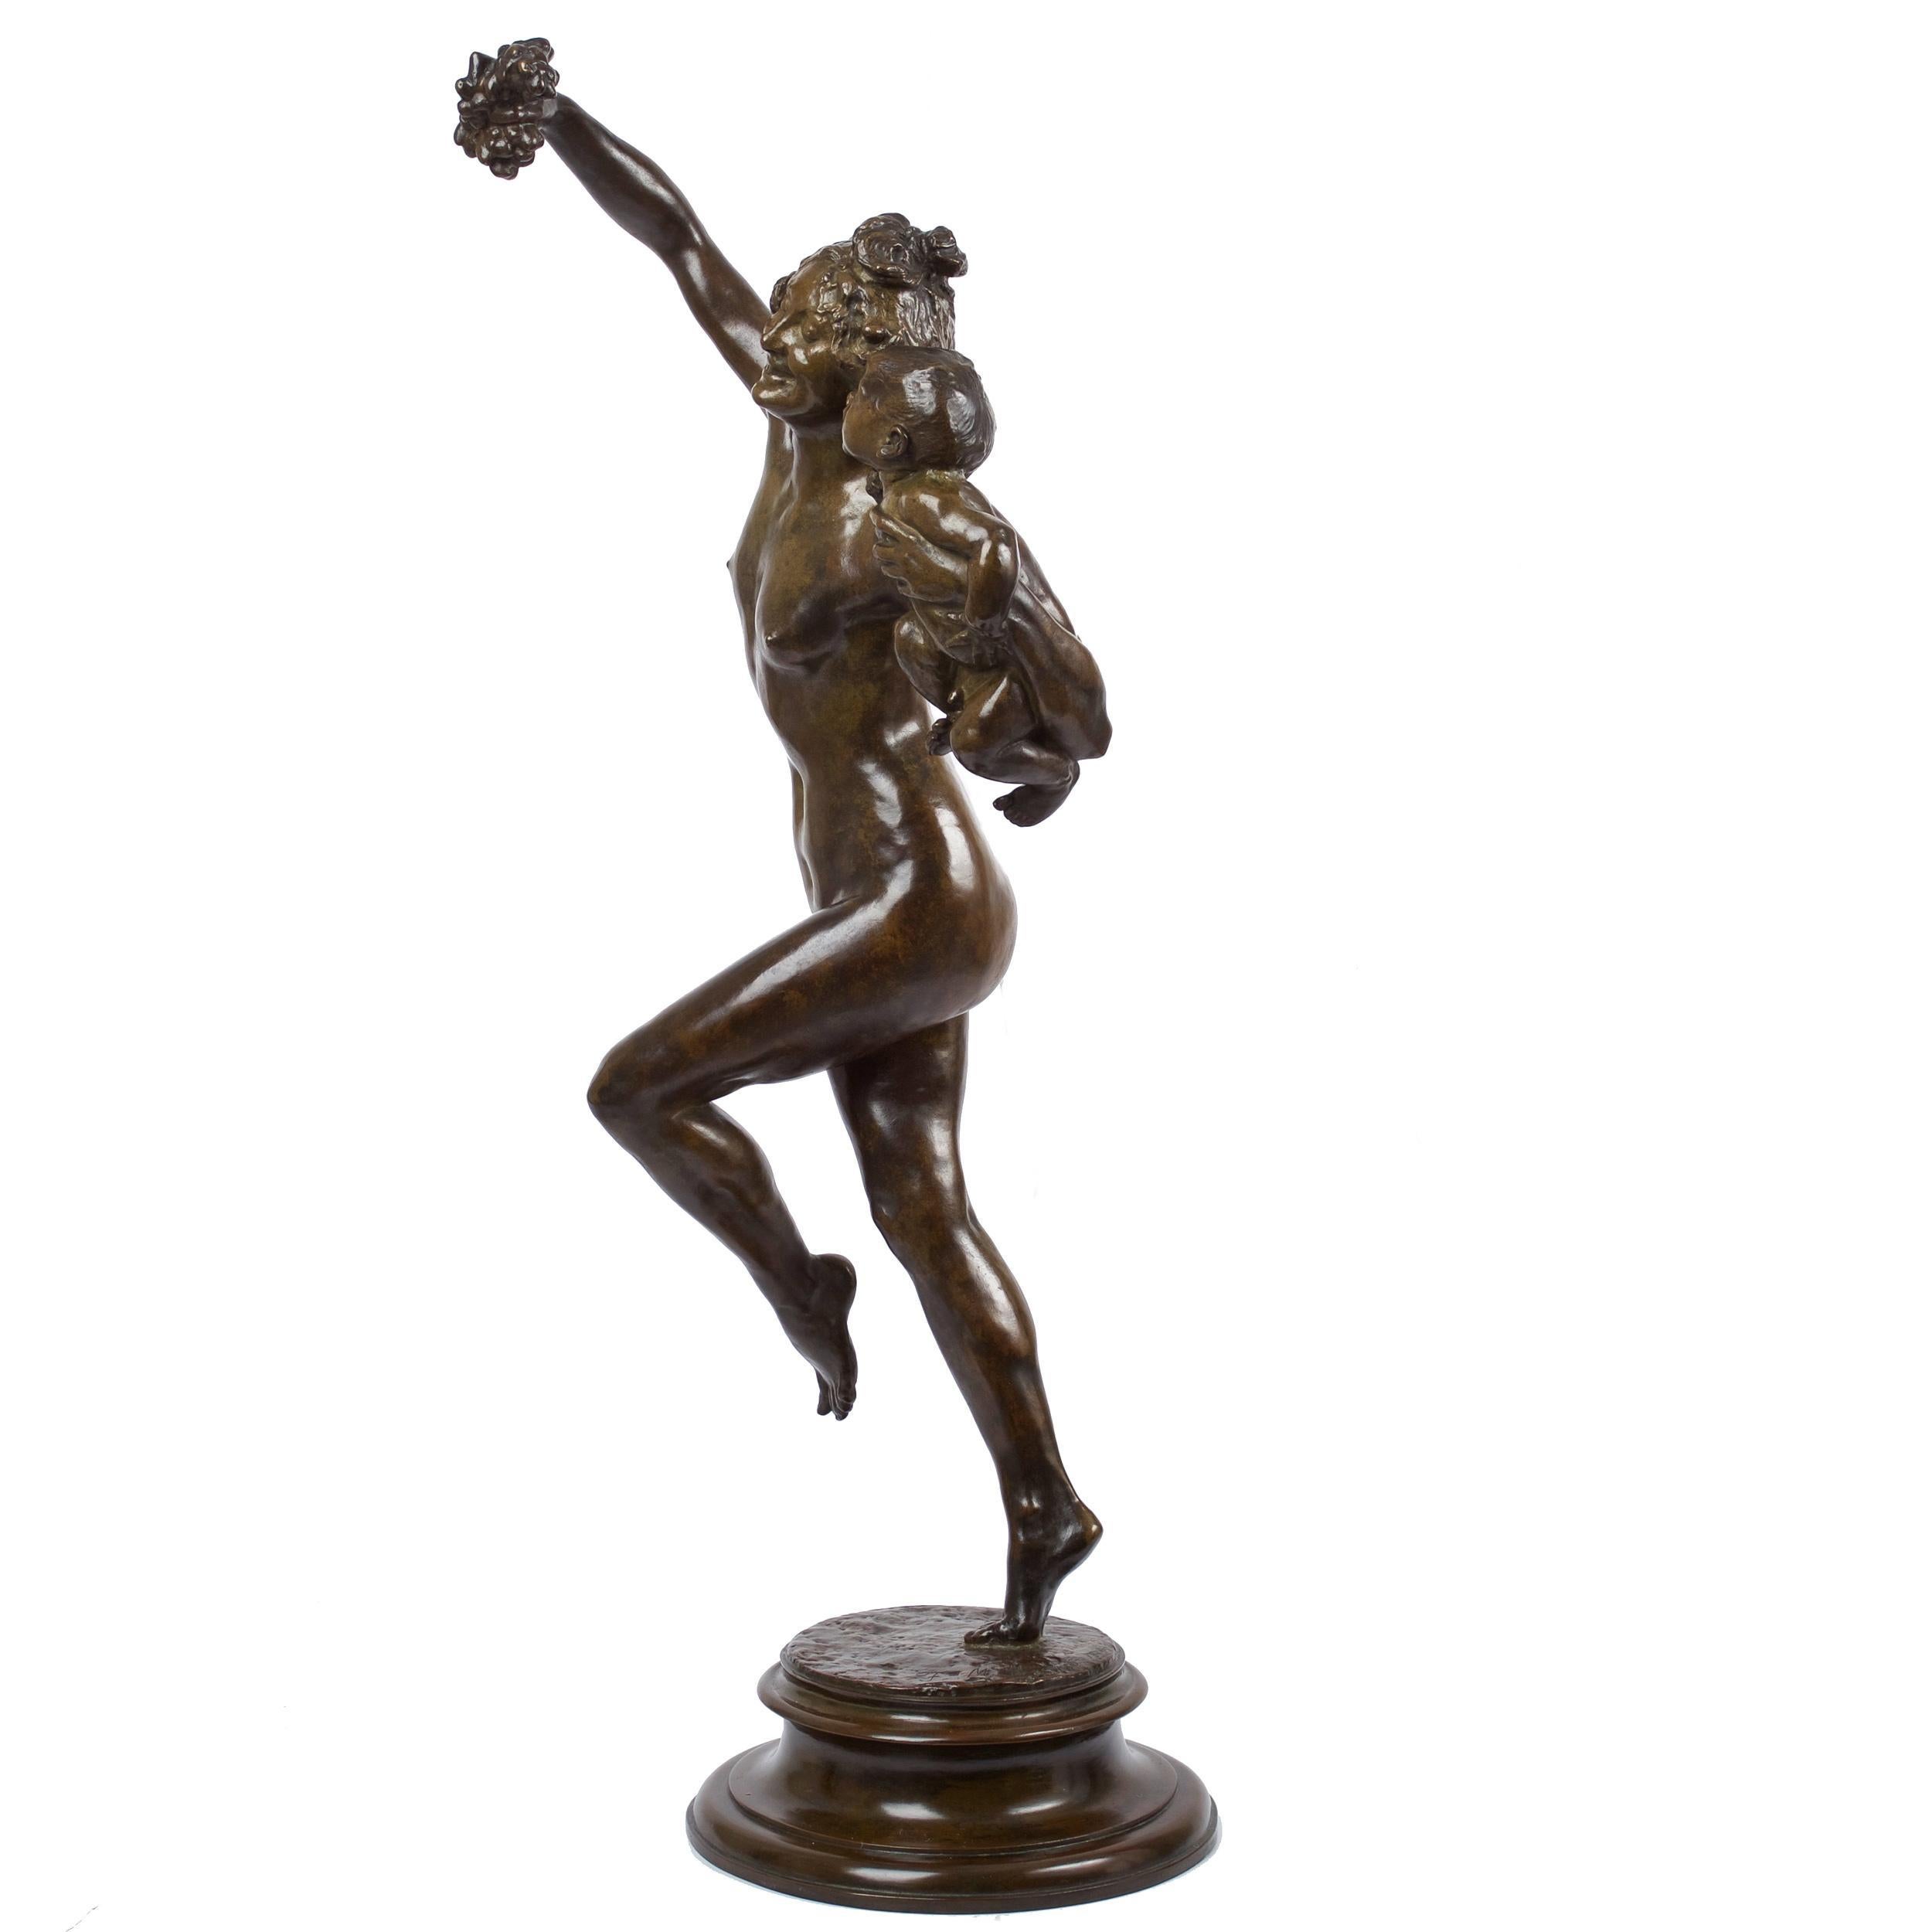 The original model of Bacchante and Infant Faun, conceived in 1893 and cast in 1894, was larger than life-size and measured roughly 83